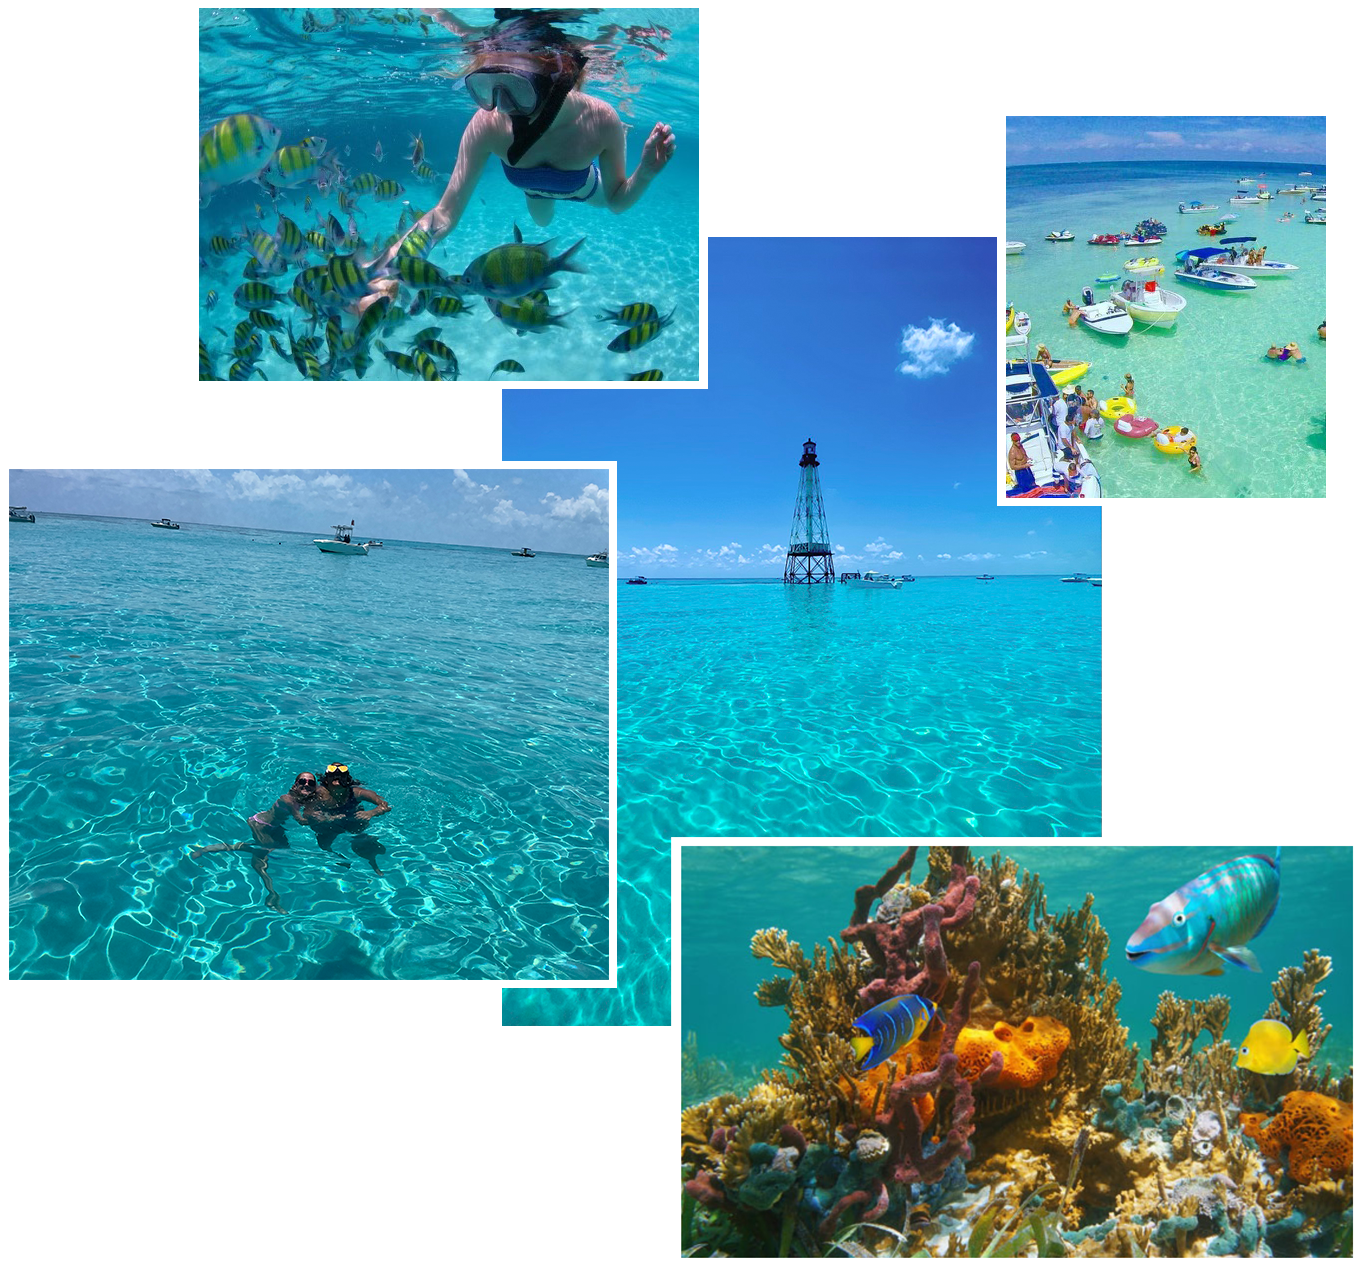 A collage of images including multiple Points of Interest that showcase the beautiful blue waters of the Florida Keys